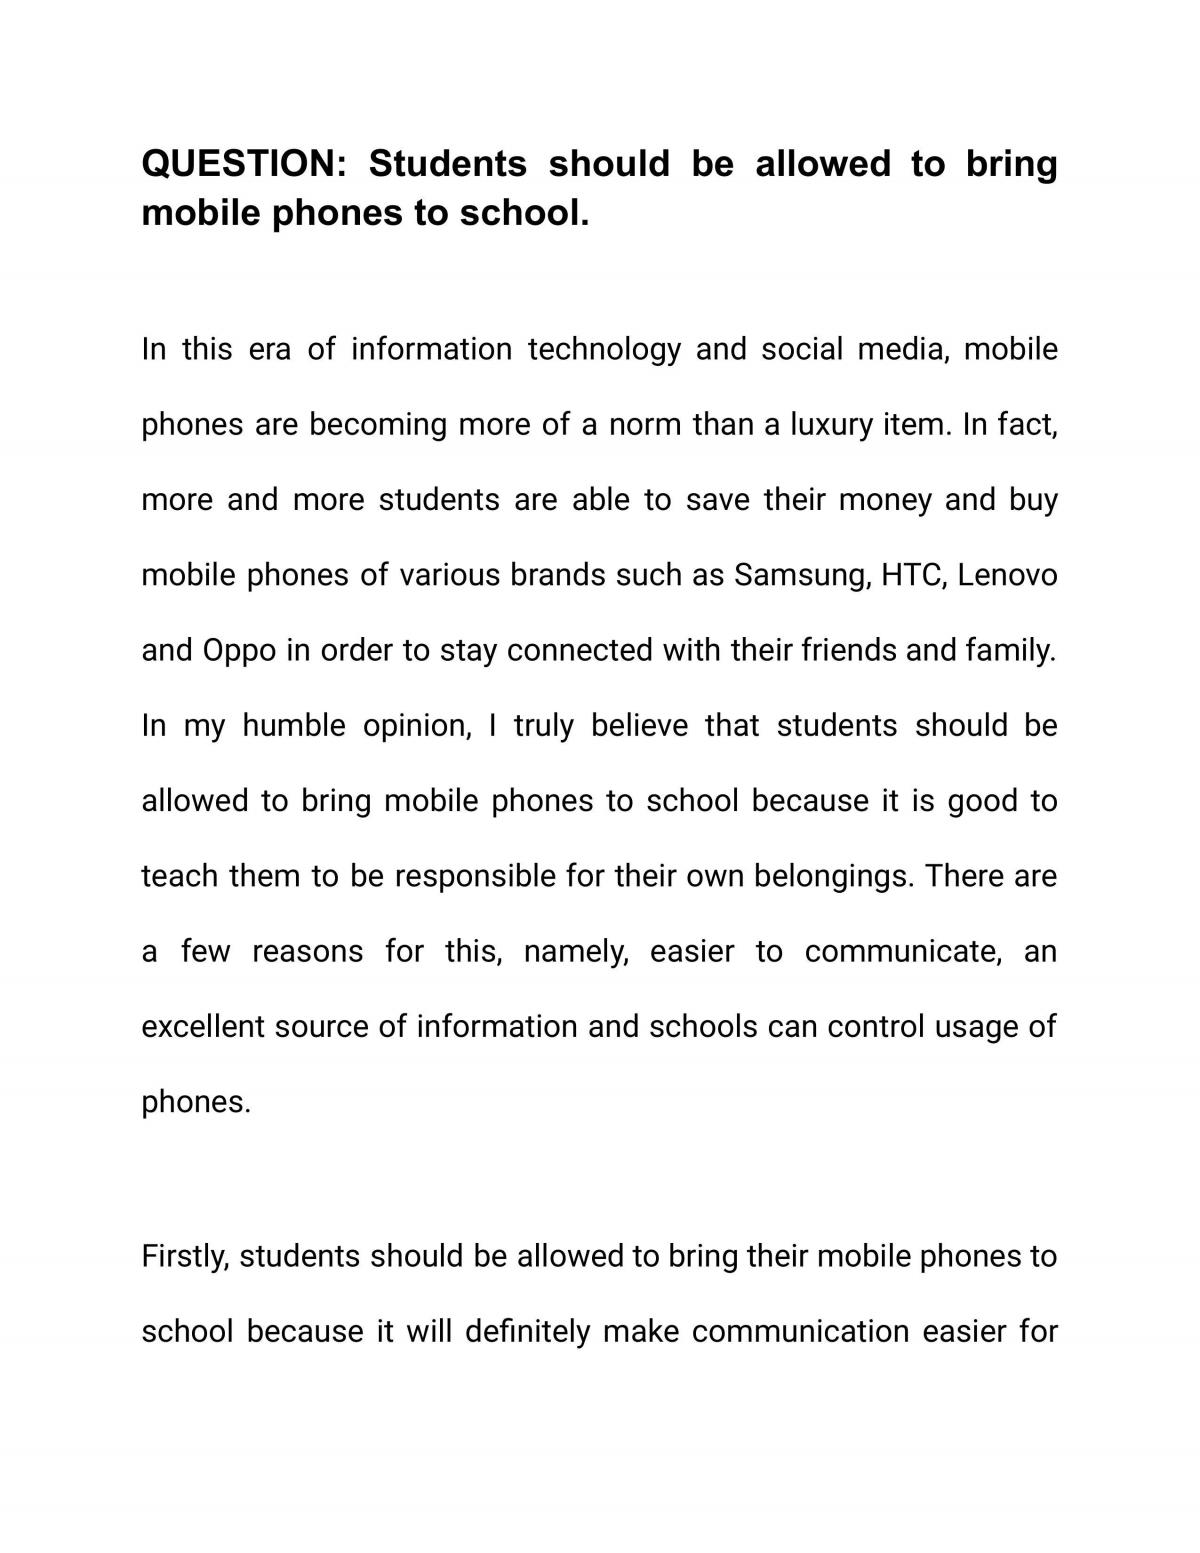 essay cell phones should be allowed in school